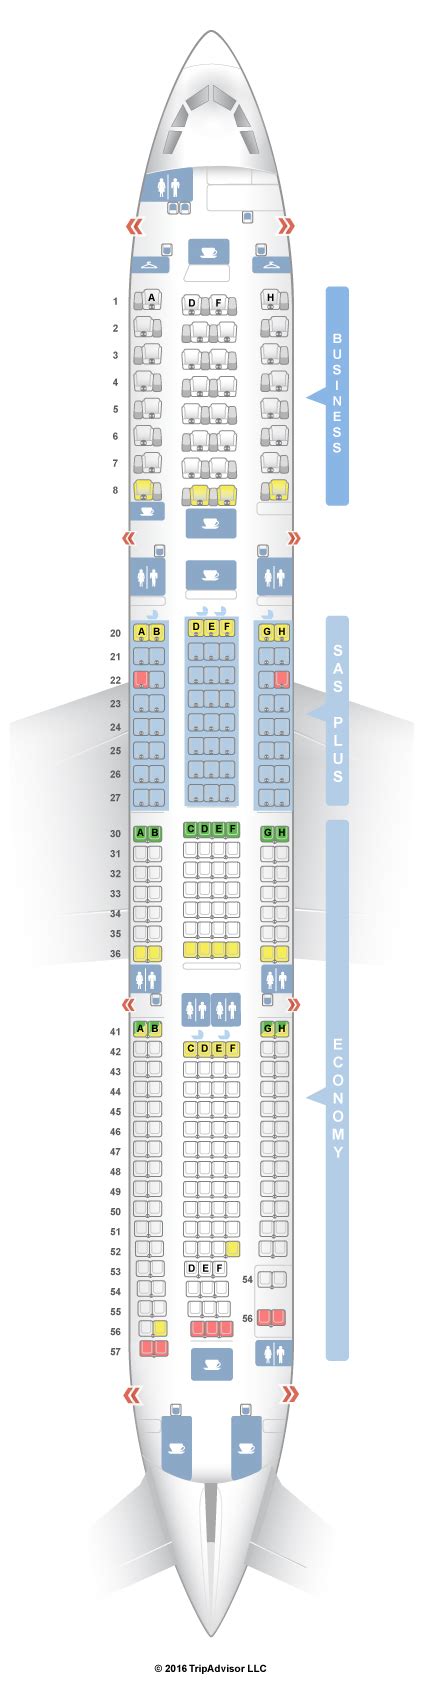 Airbus A330 Seat Map Campus Map